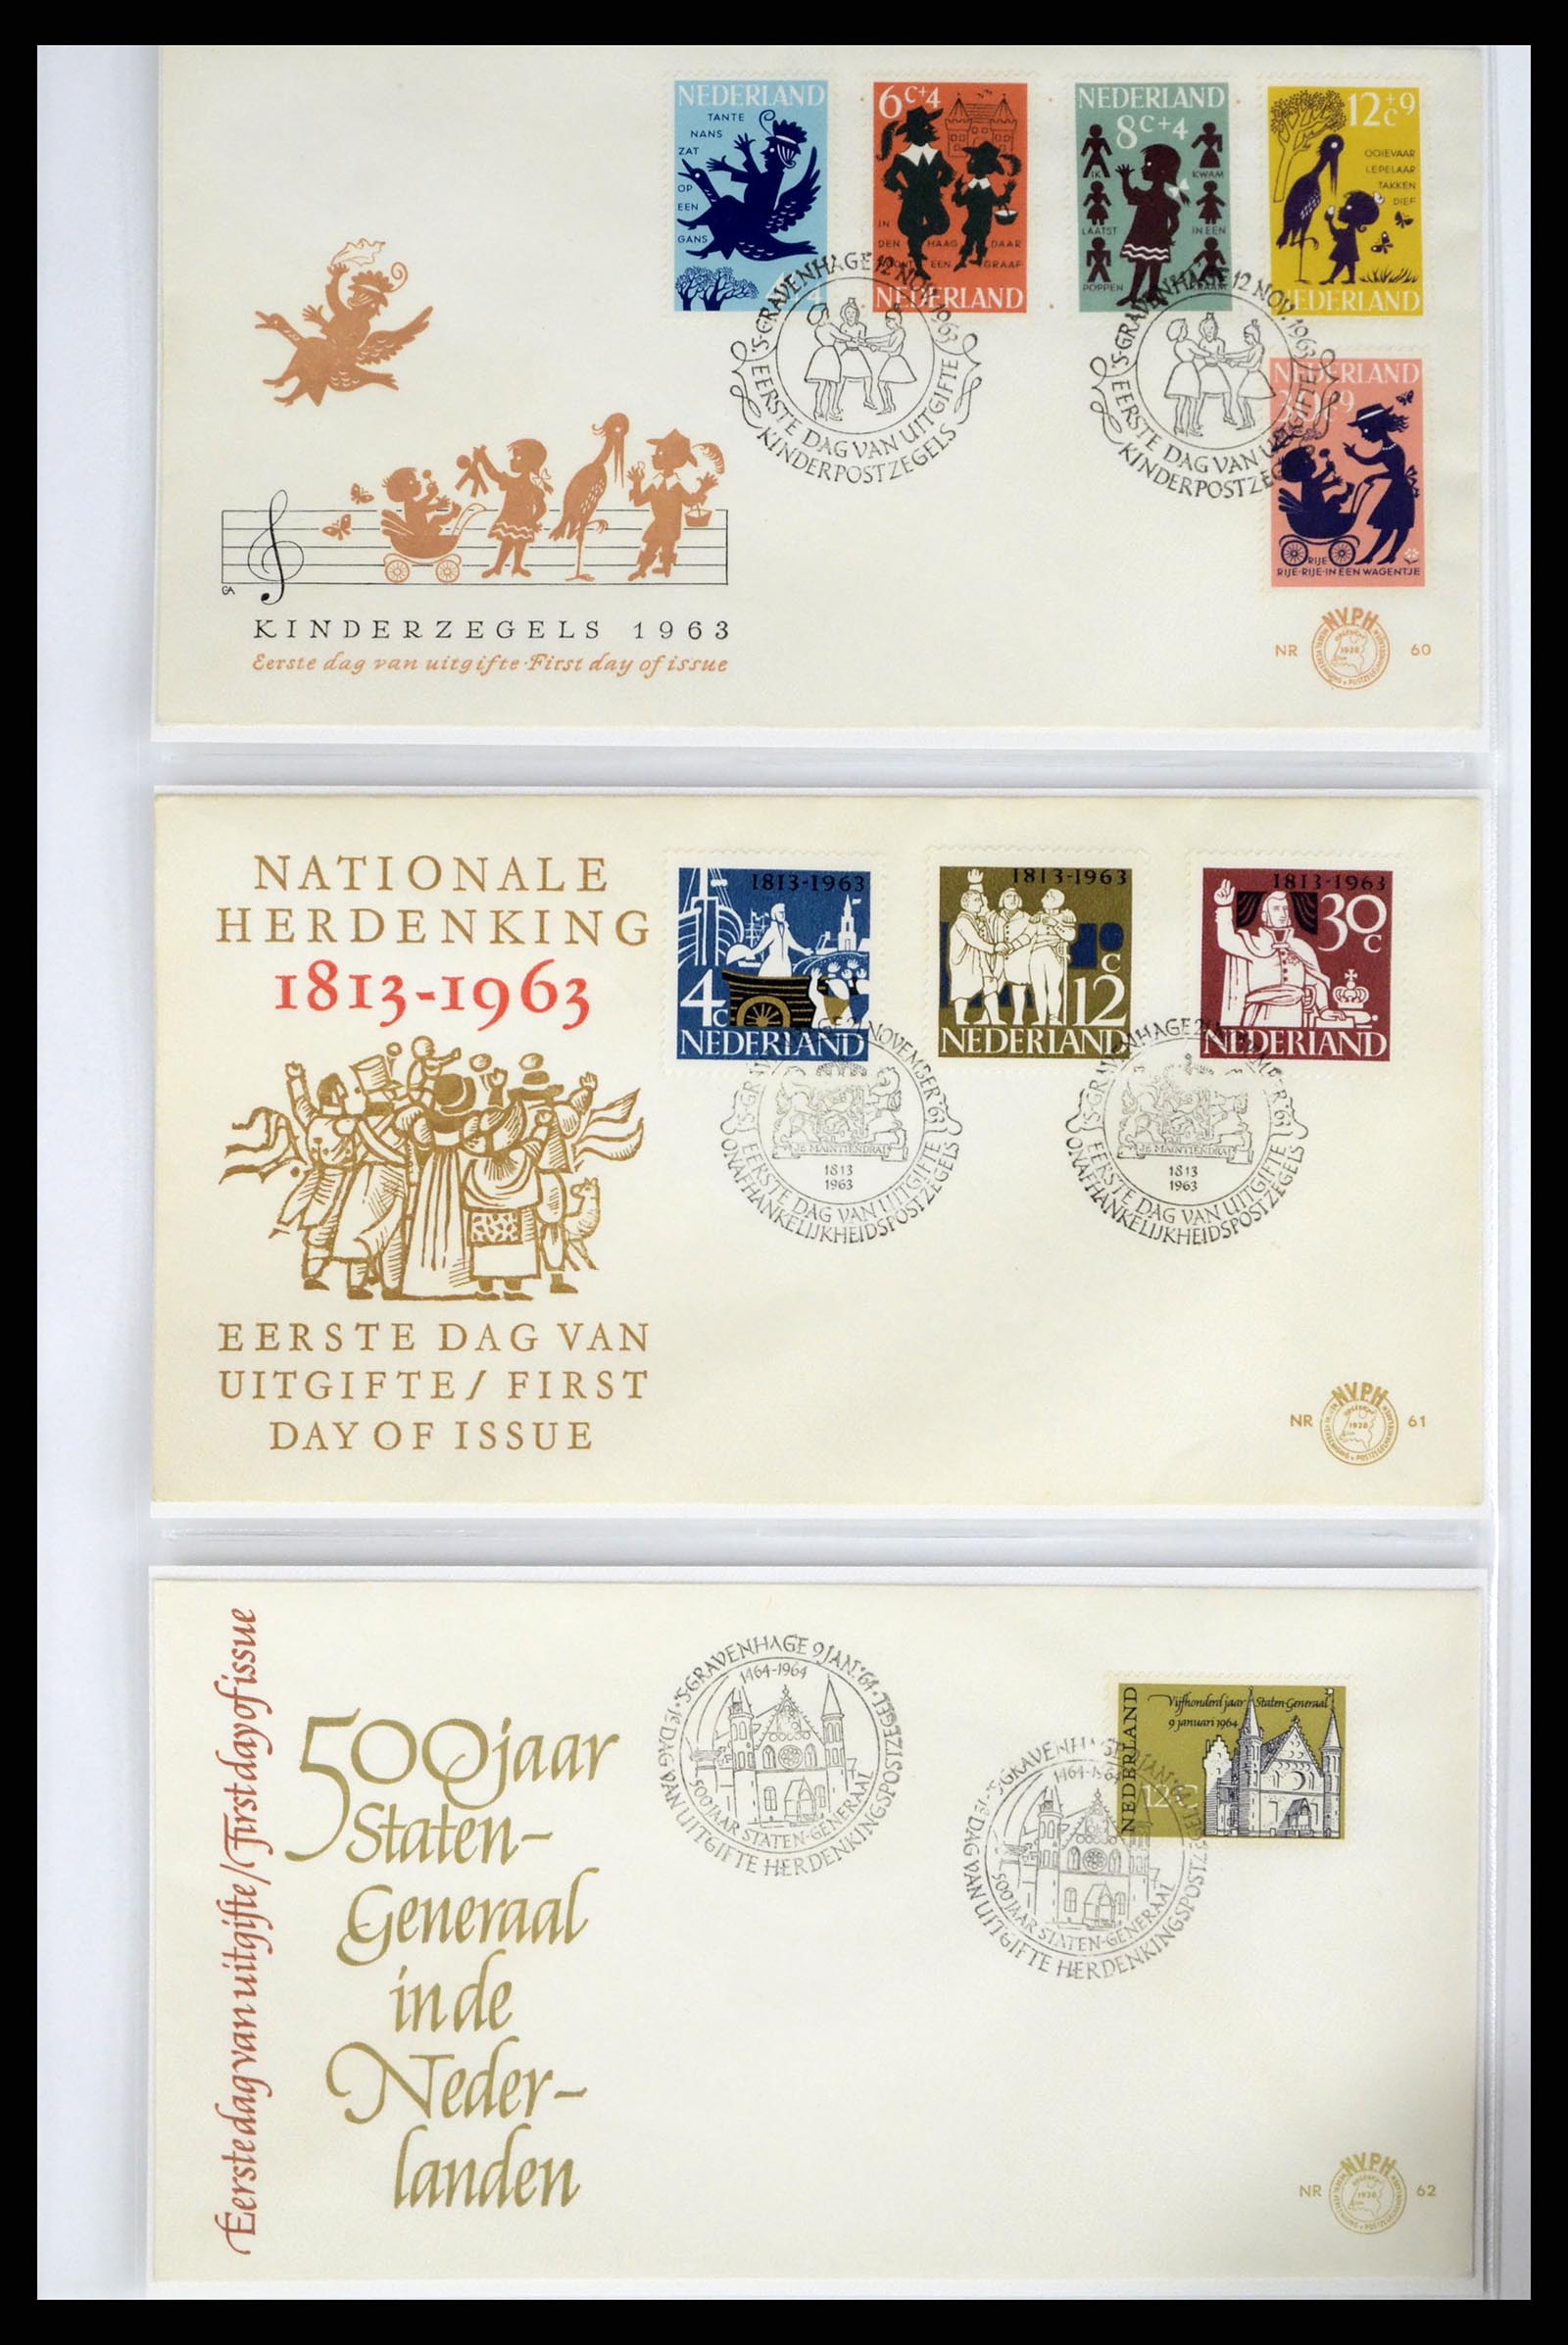 37983 014 - Stamp Collection 37983 Netherland FDC's 1954-1987.